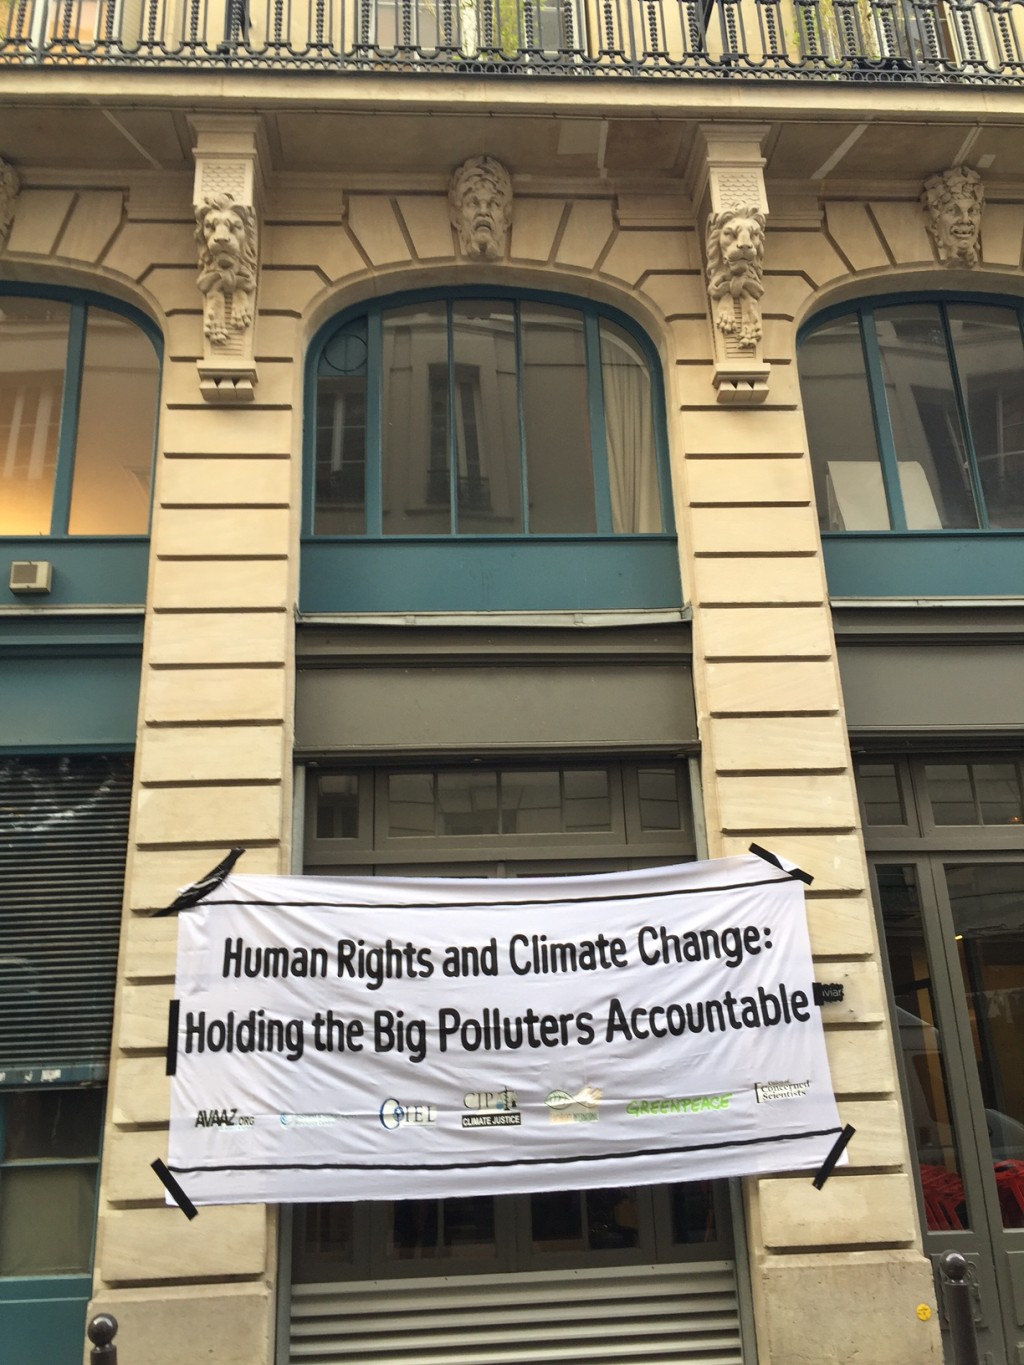 A large streamer outside the venue of the press briefing organized by Greenpeace International calls for corporate accountability. JN